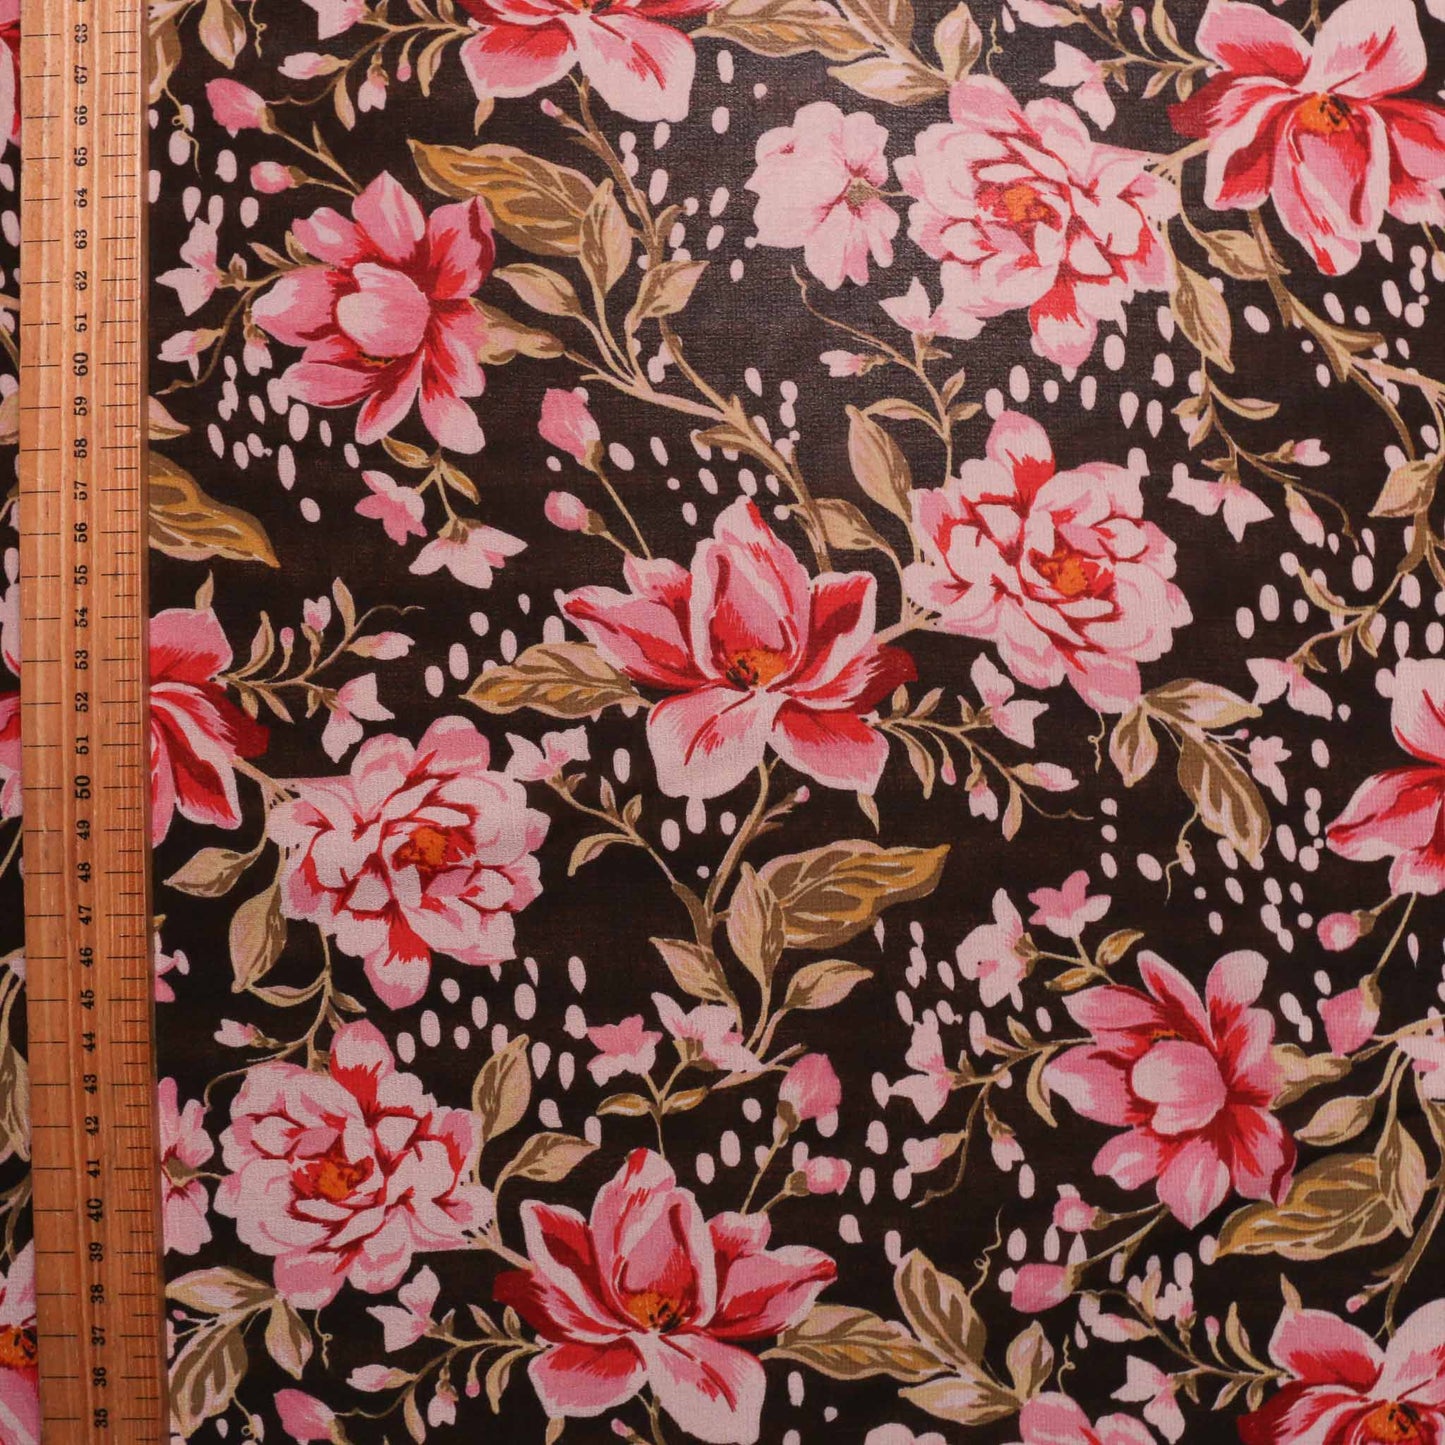 metre chiffon dressmaking fabric with black and pink floral design print